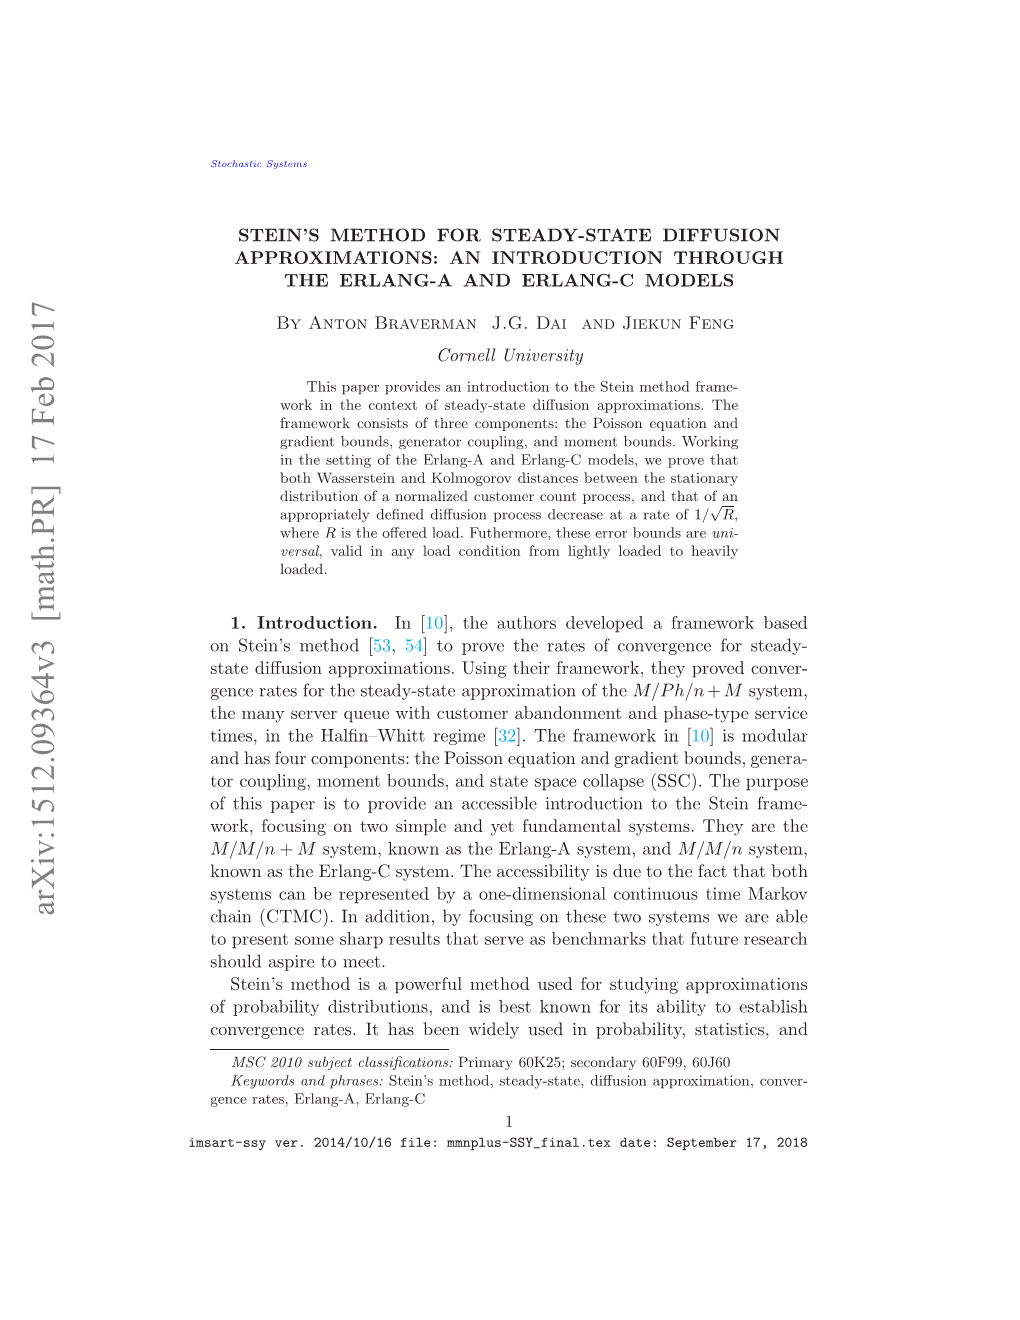 Stein's Method for Steady-State Diffusion Approximations